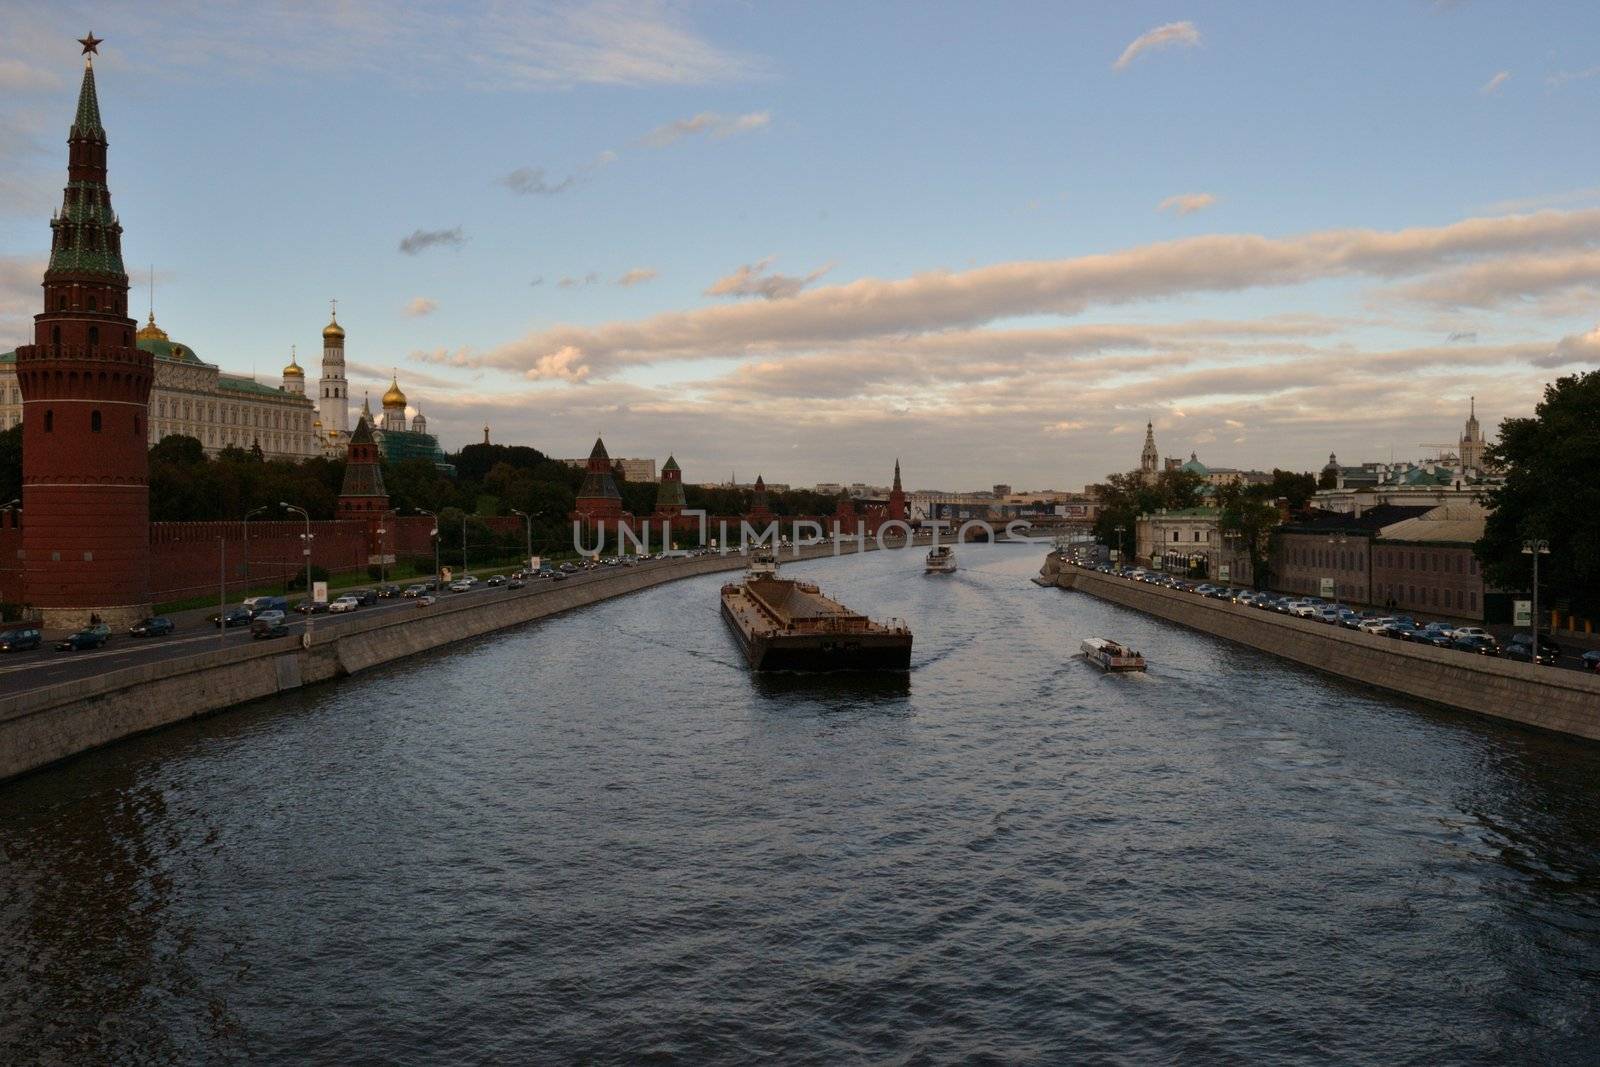 The view of the Moskva river in the evening